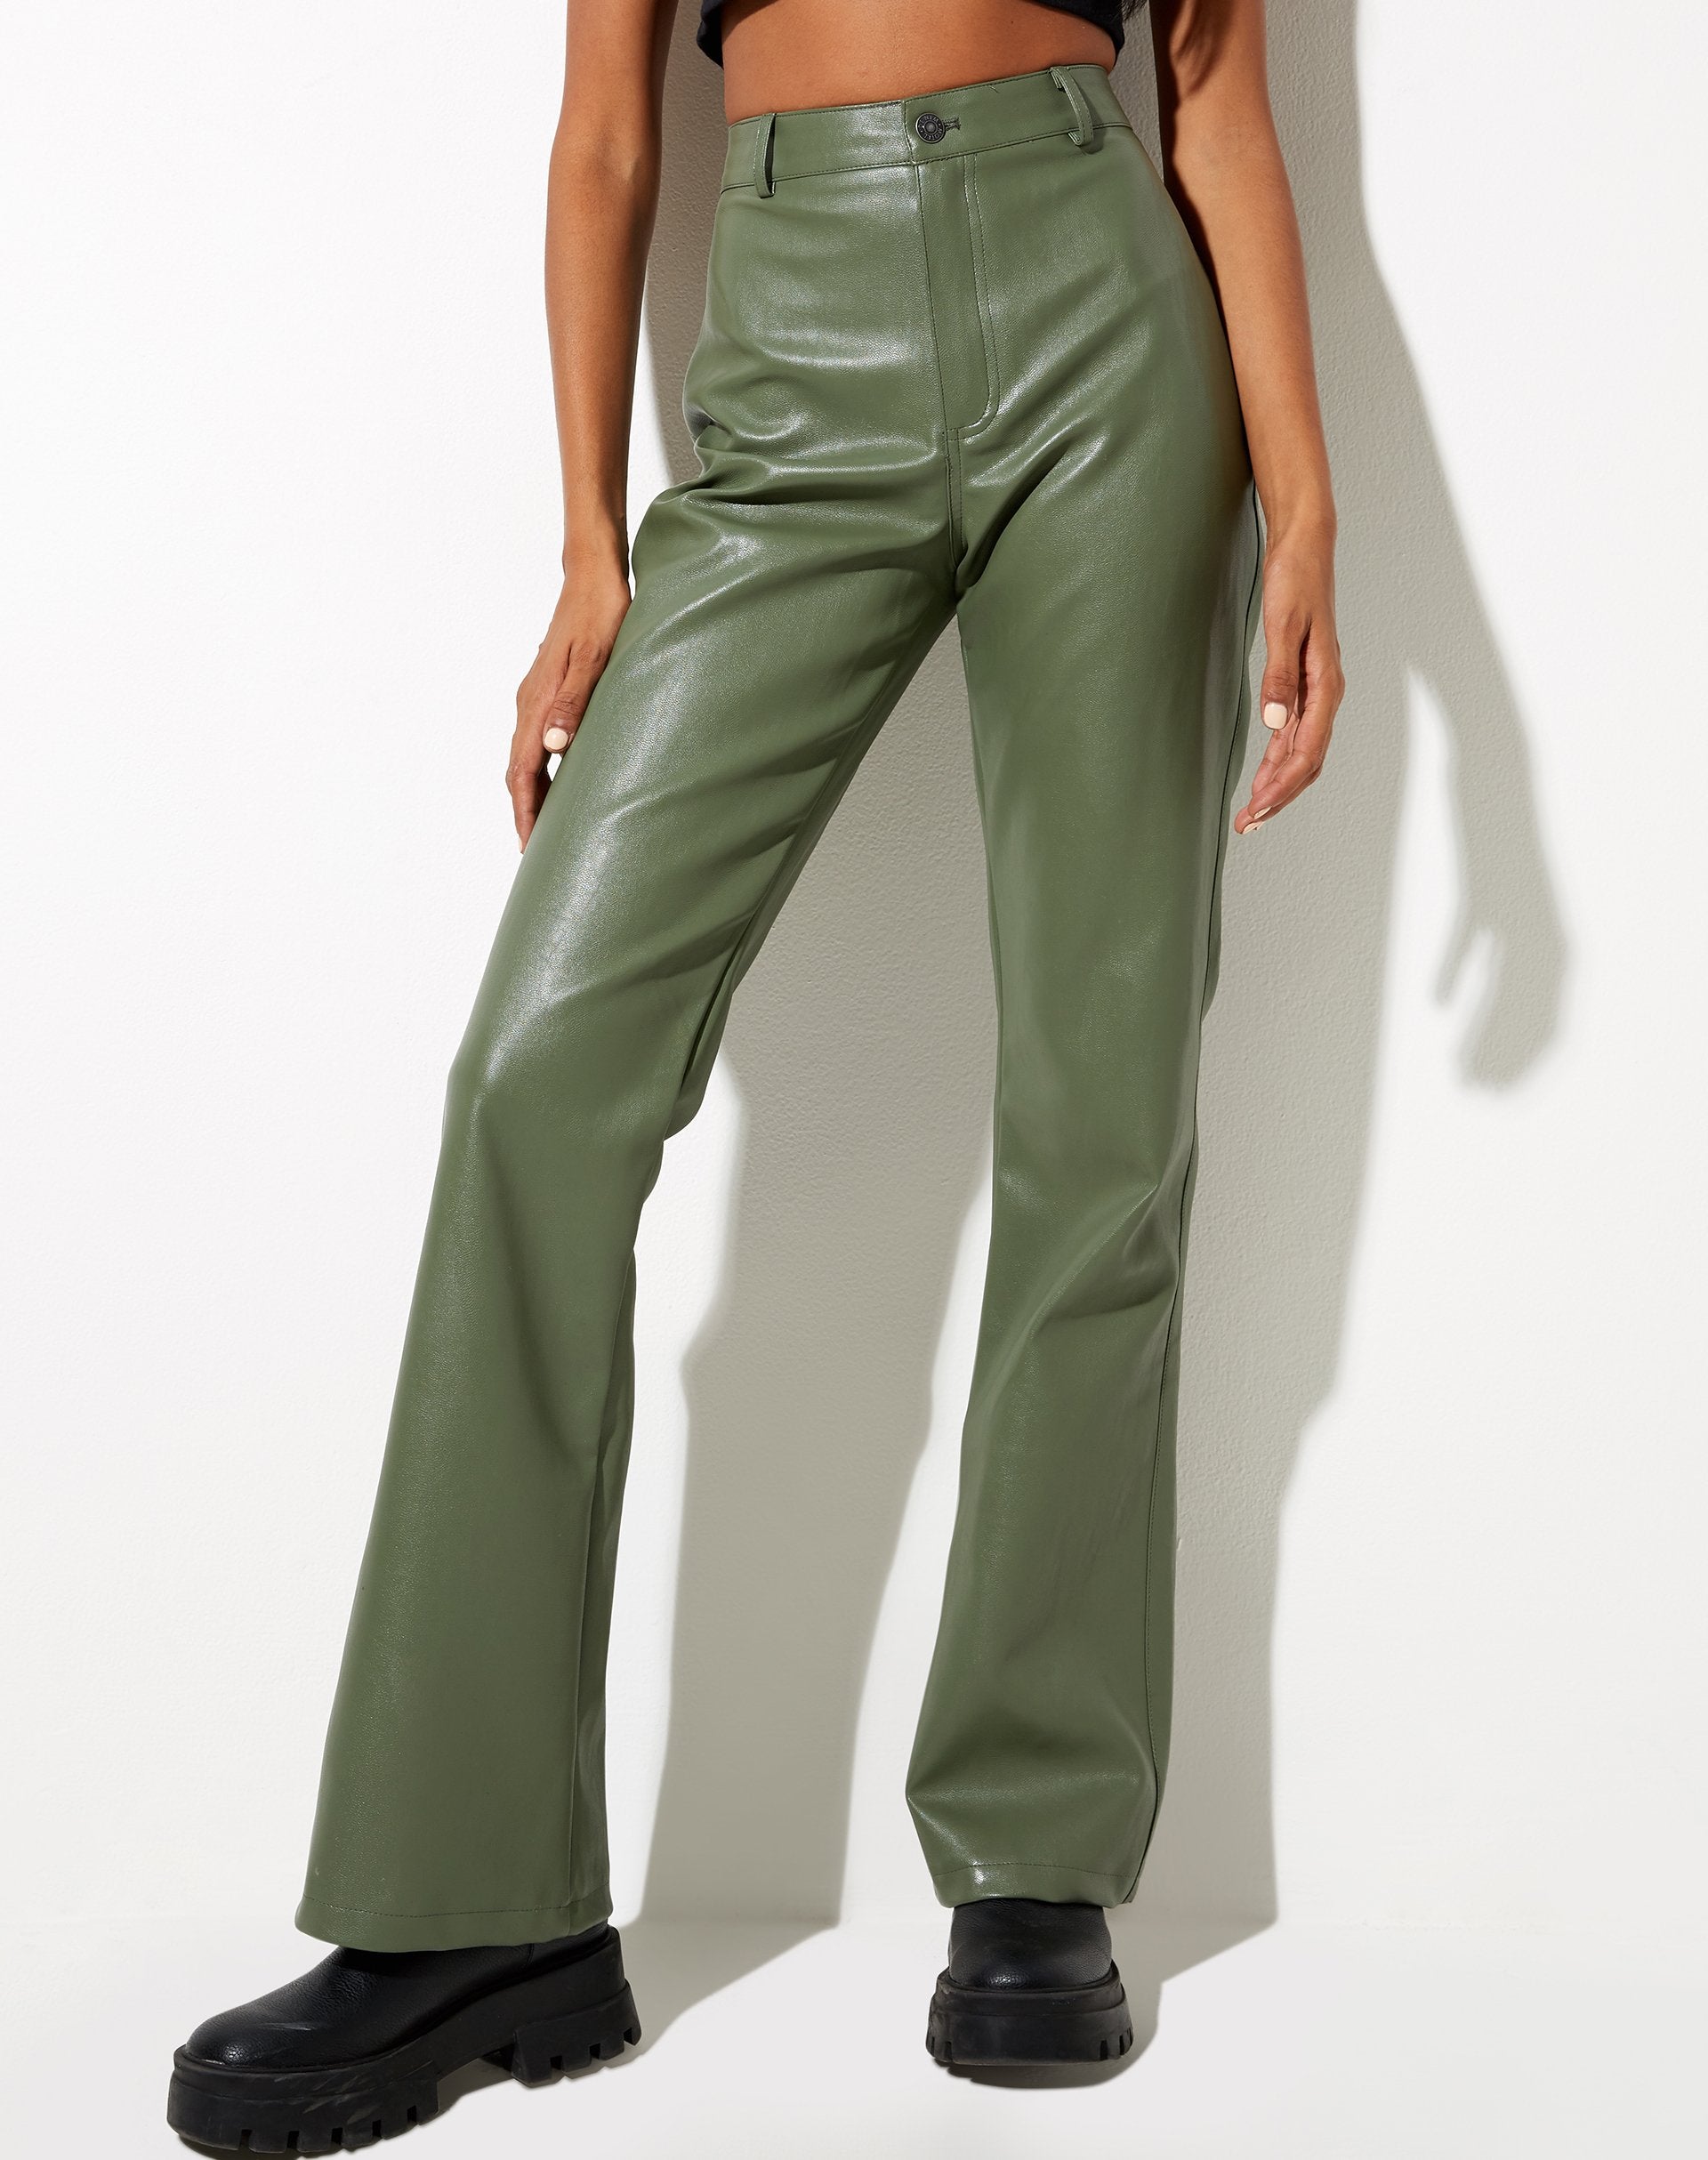 Zoven Flare Trouser in Pu Green